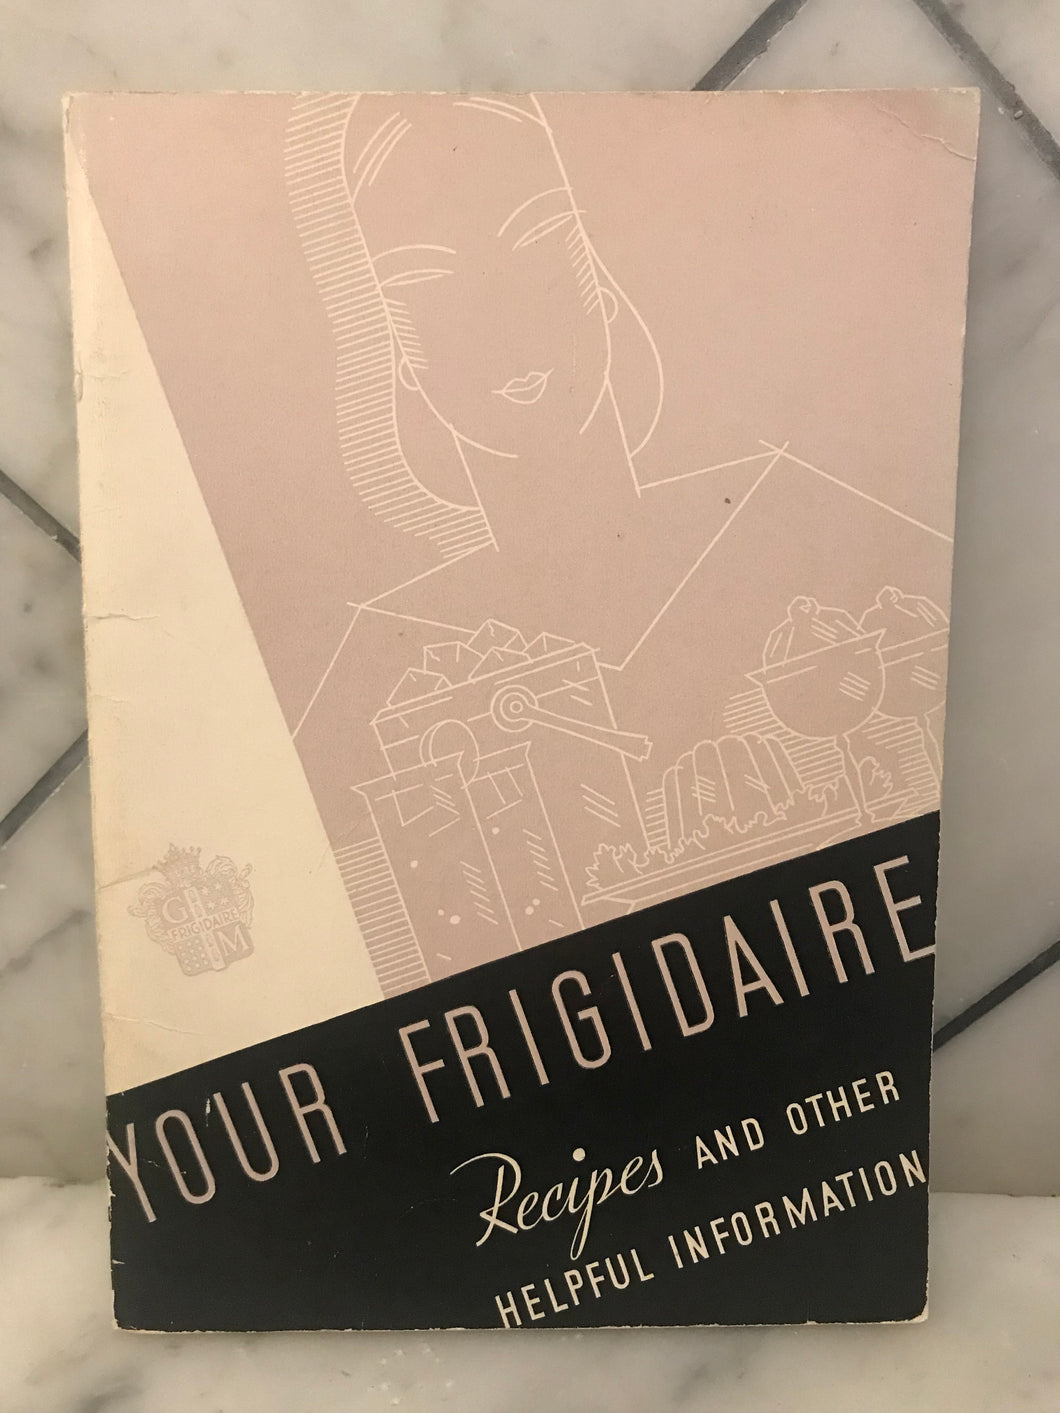 Your Frigidaire, Recipes and Other Helpful Information